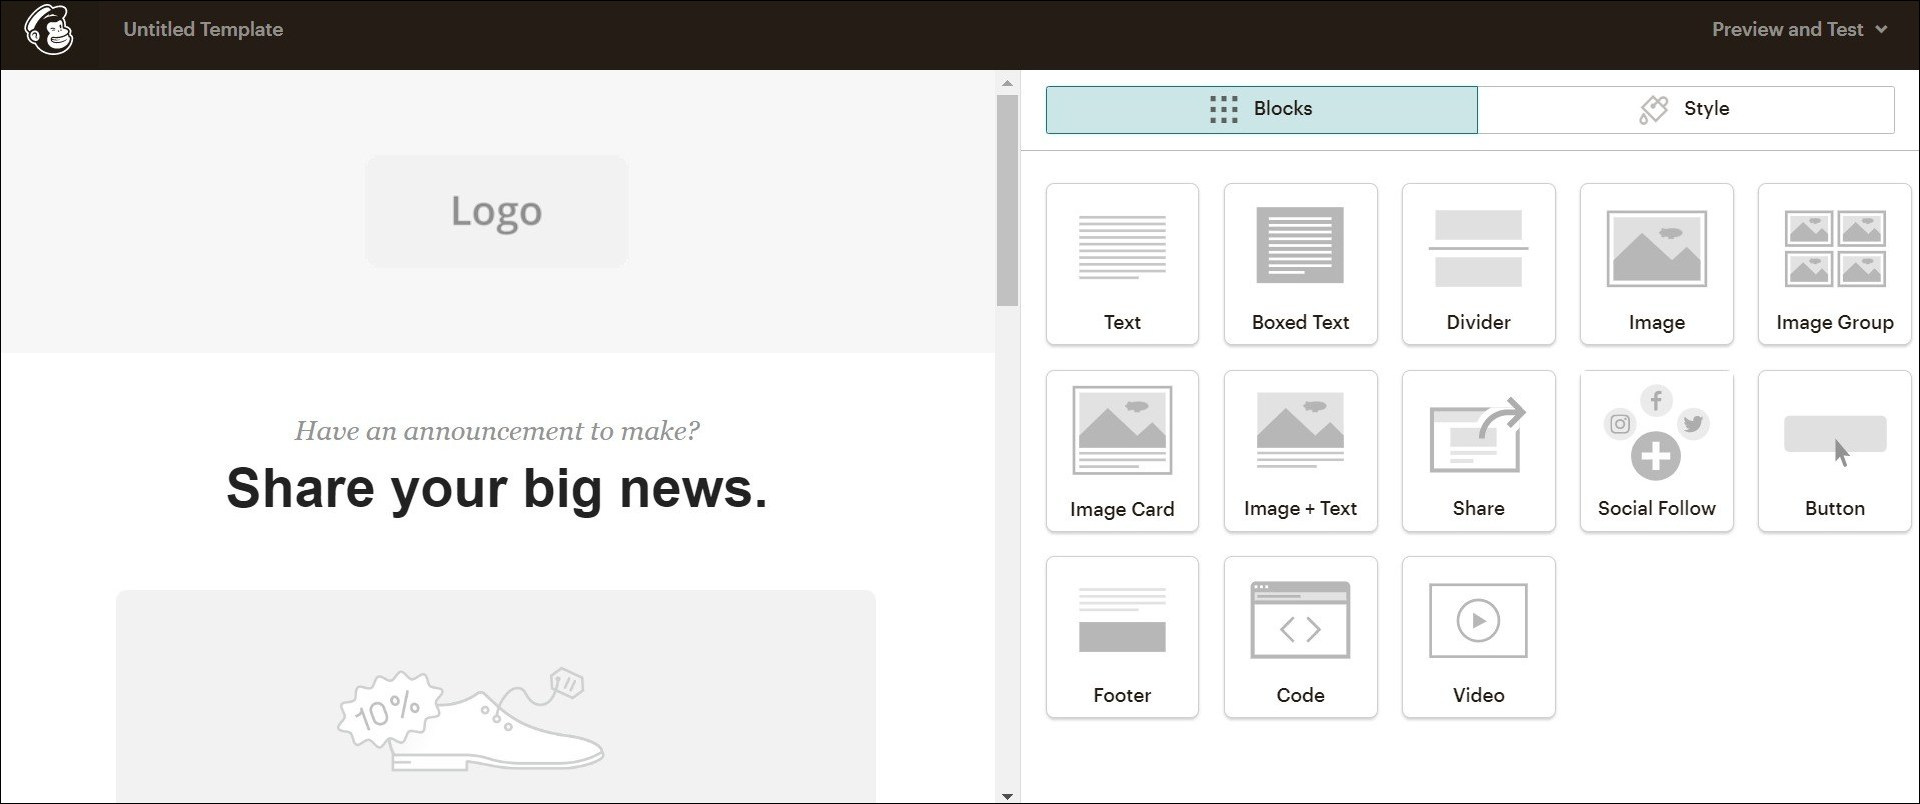 Previewing email design in Mailchimp